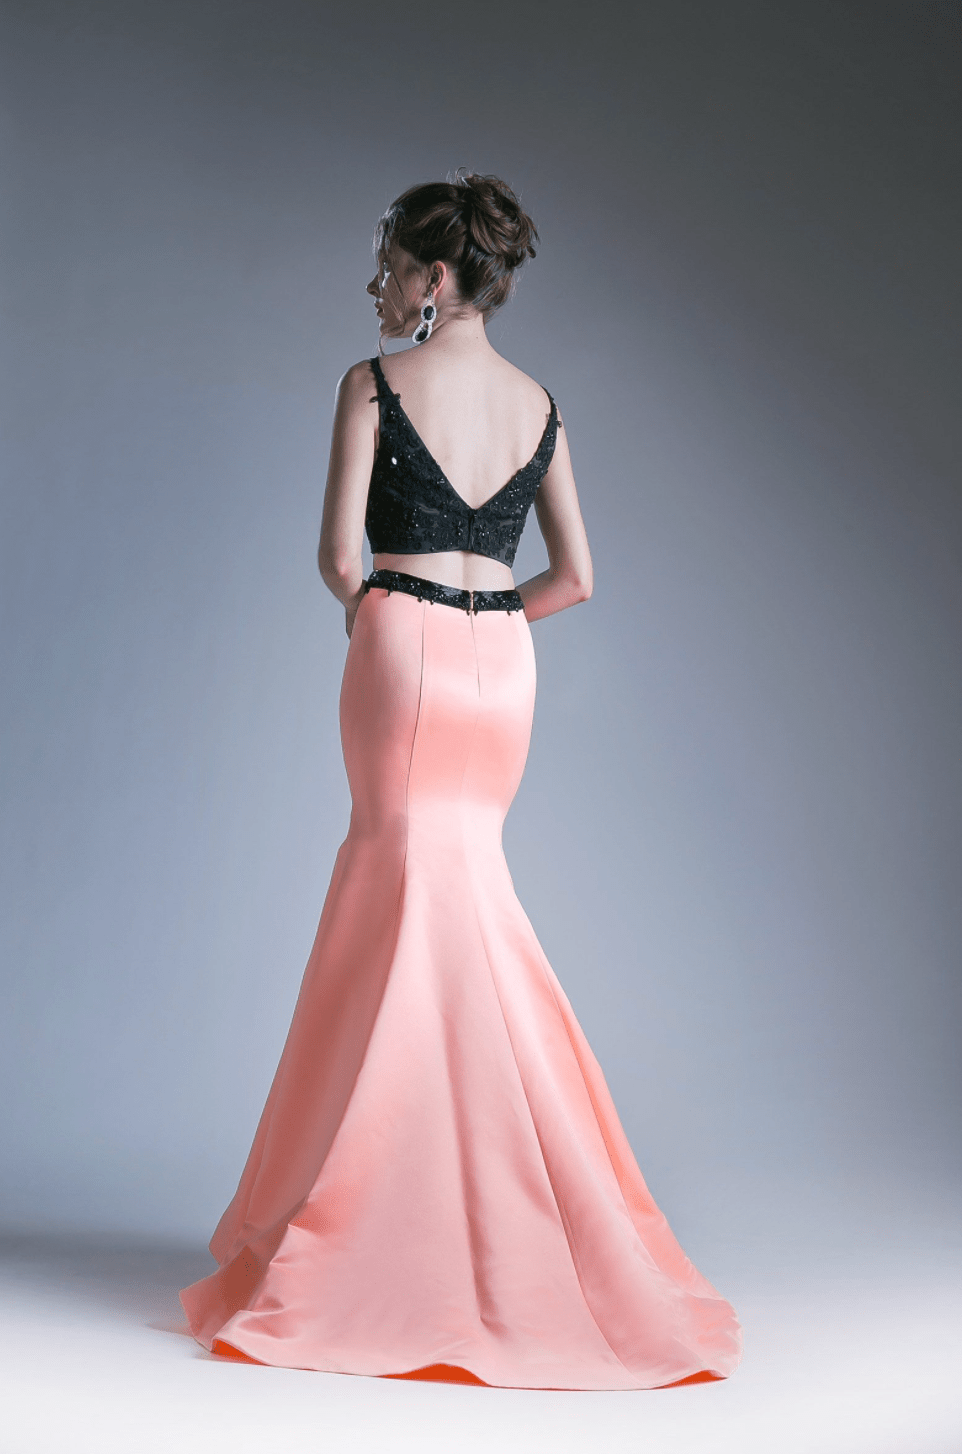 Two Piece Mermaid Satin Dress by Ladivine - NORMA REED